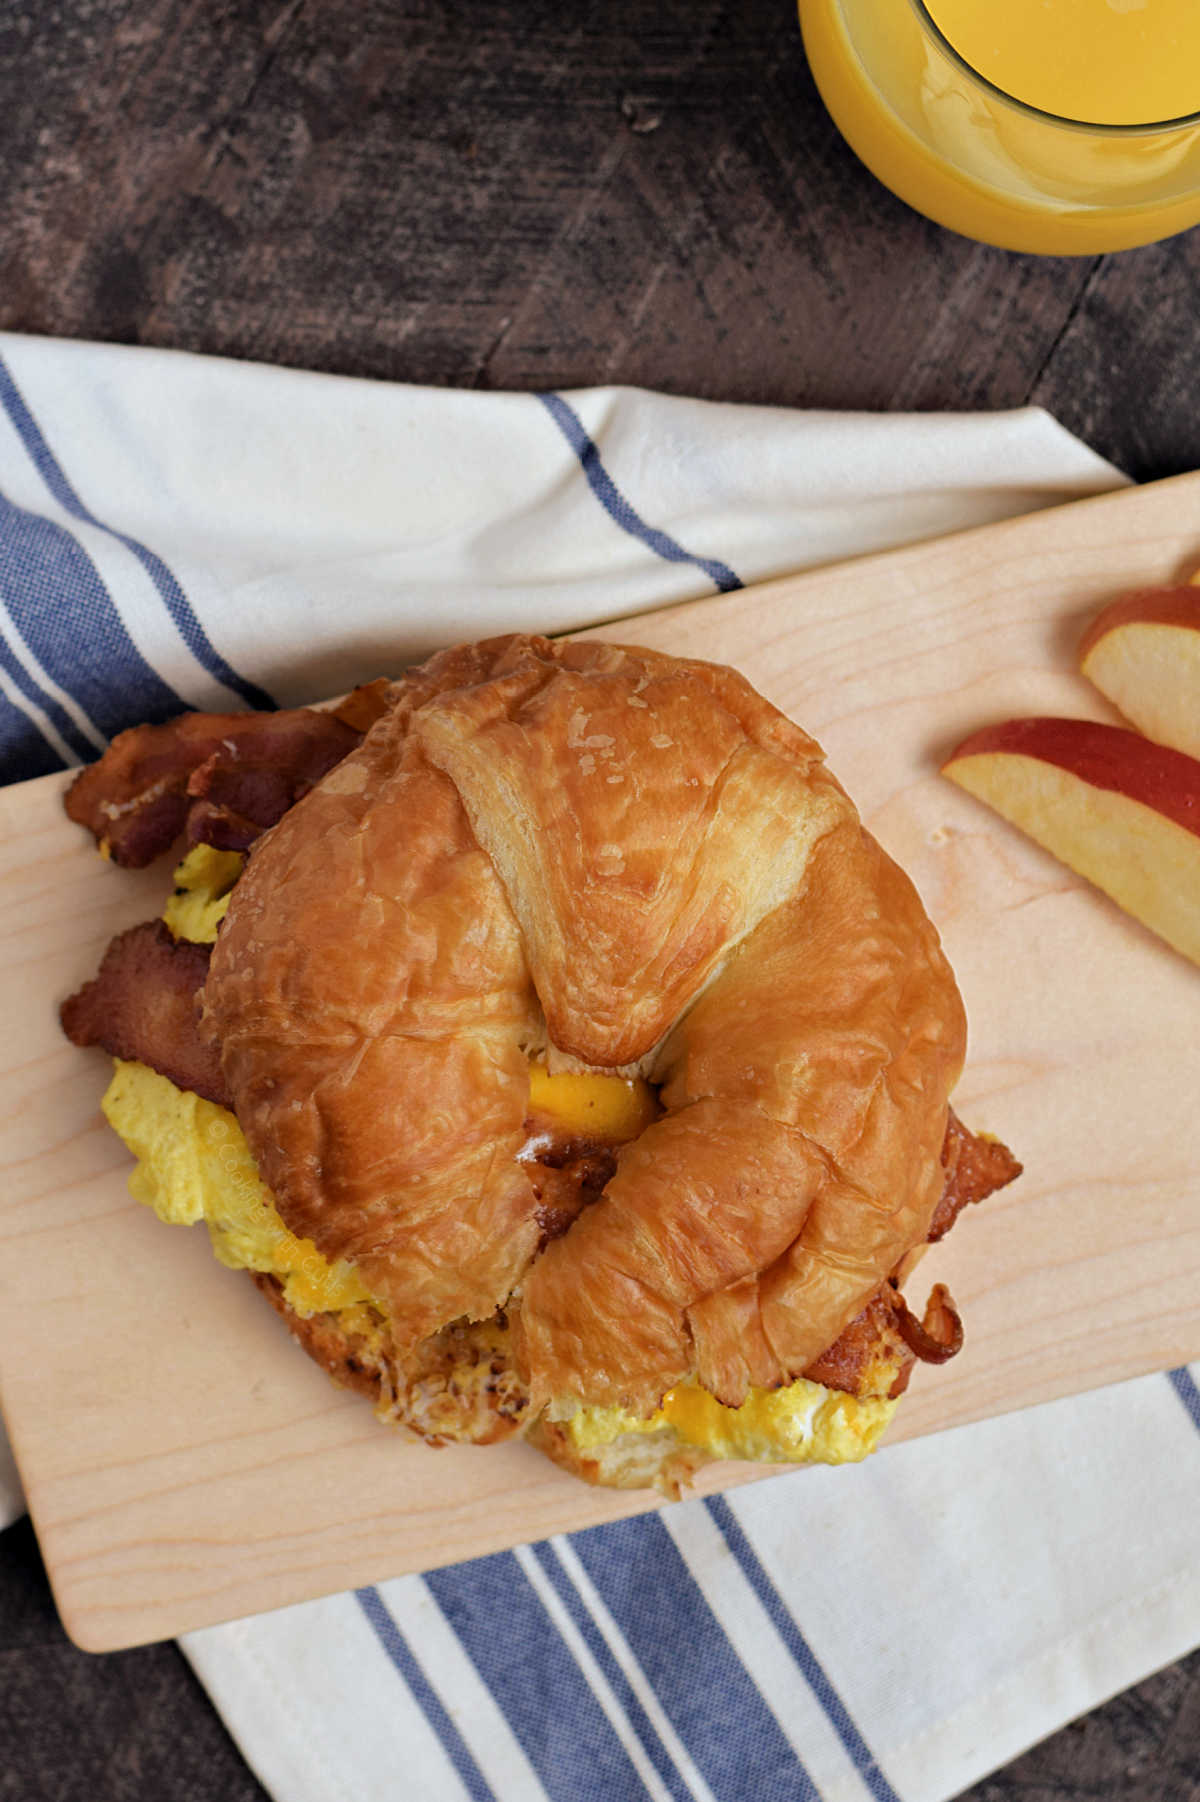 Bacon, scrambled egg, and melted cheese on a croissant with orange juice and apple slices in the background.